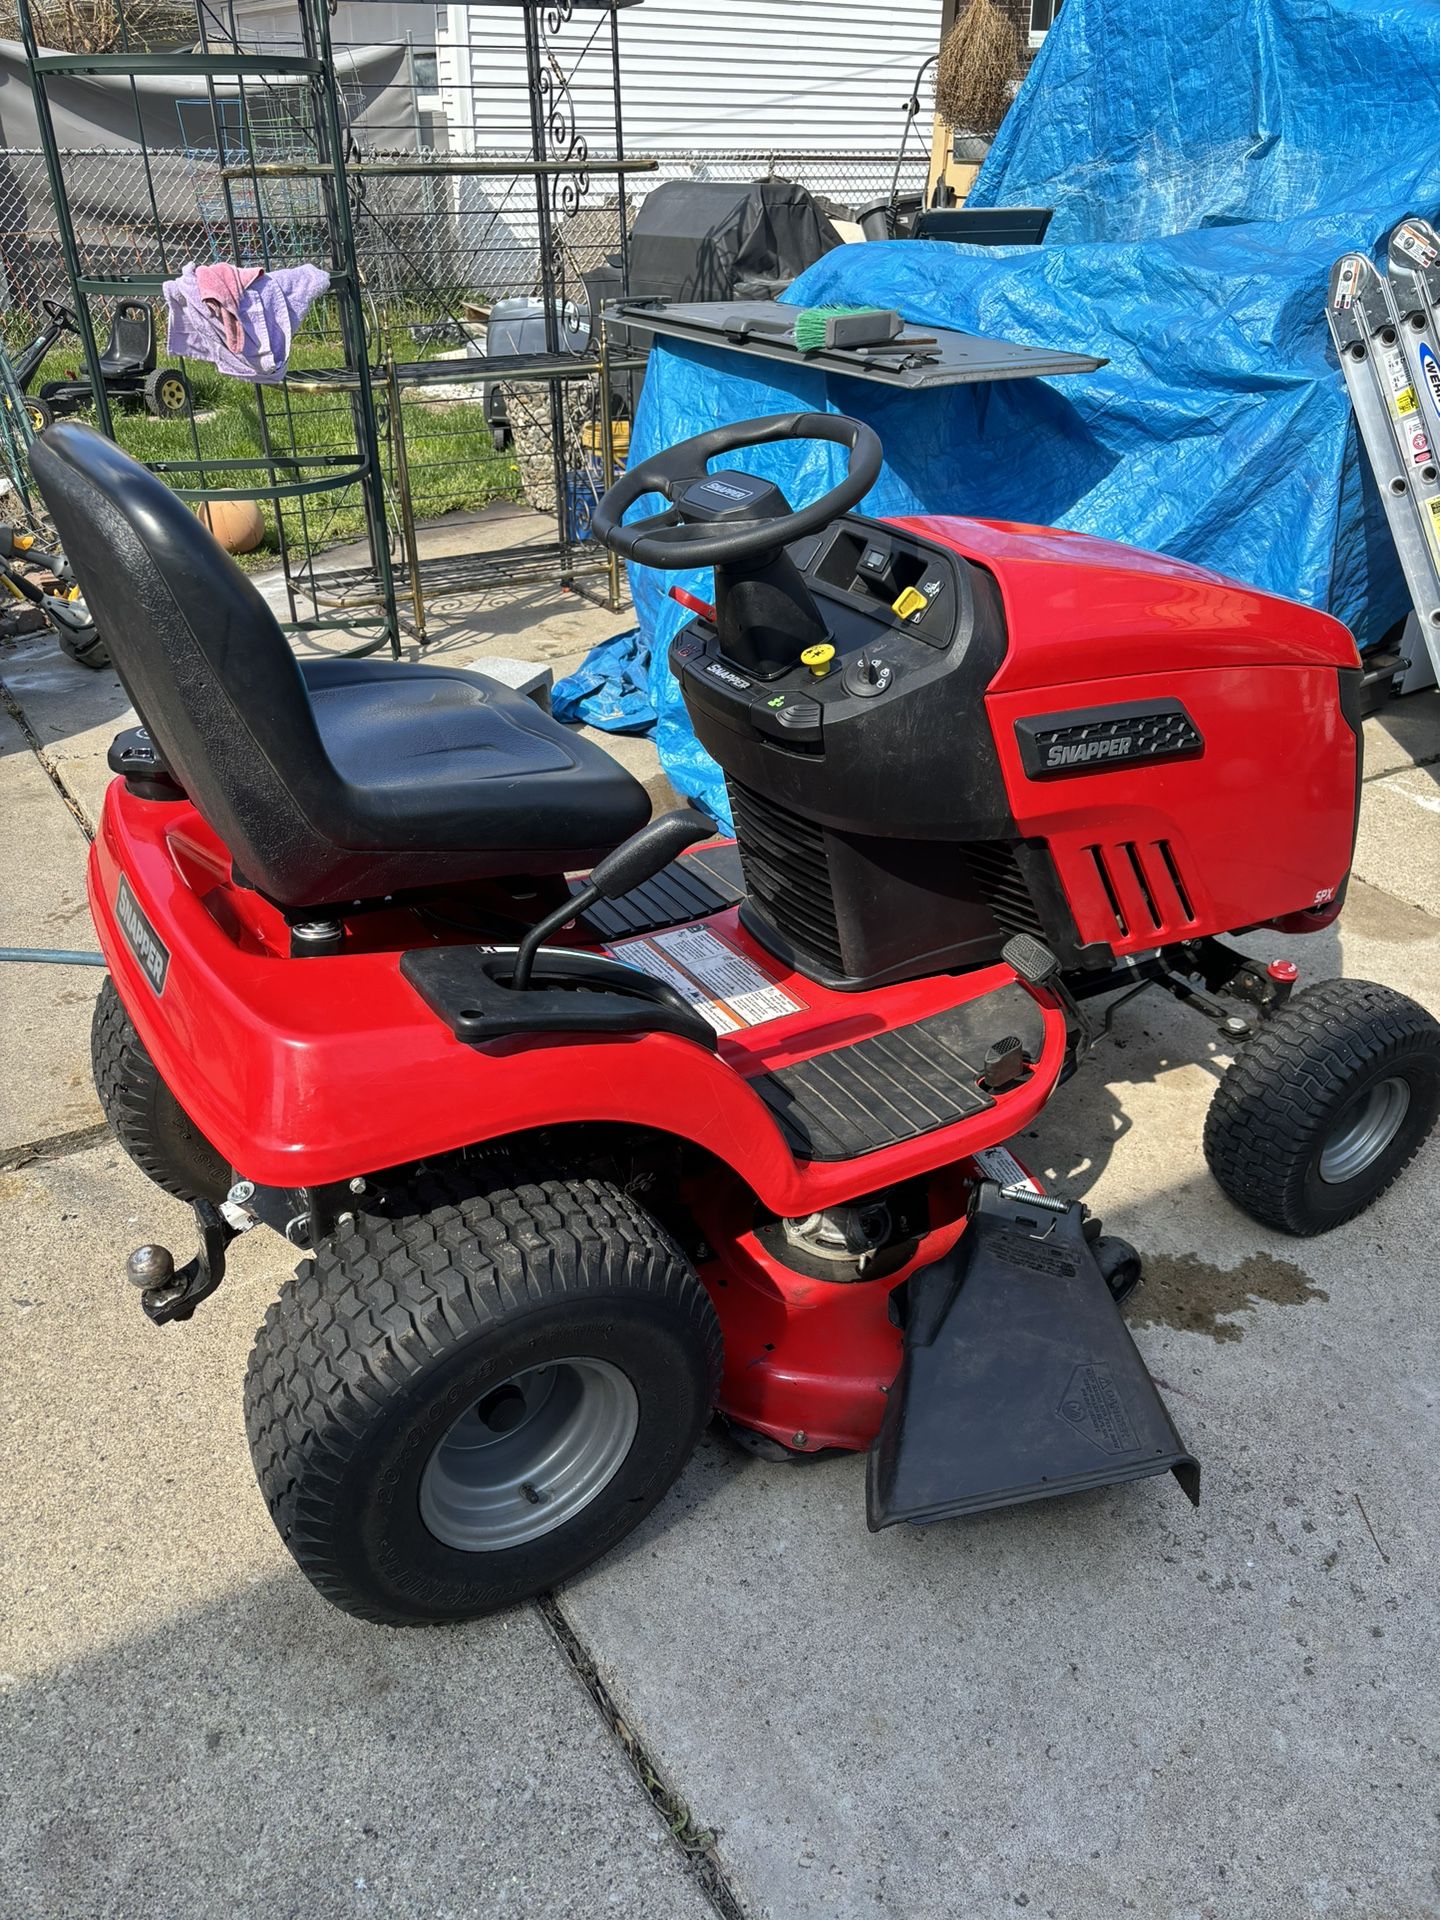 Red ride lawnmower